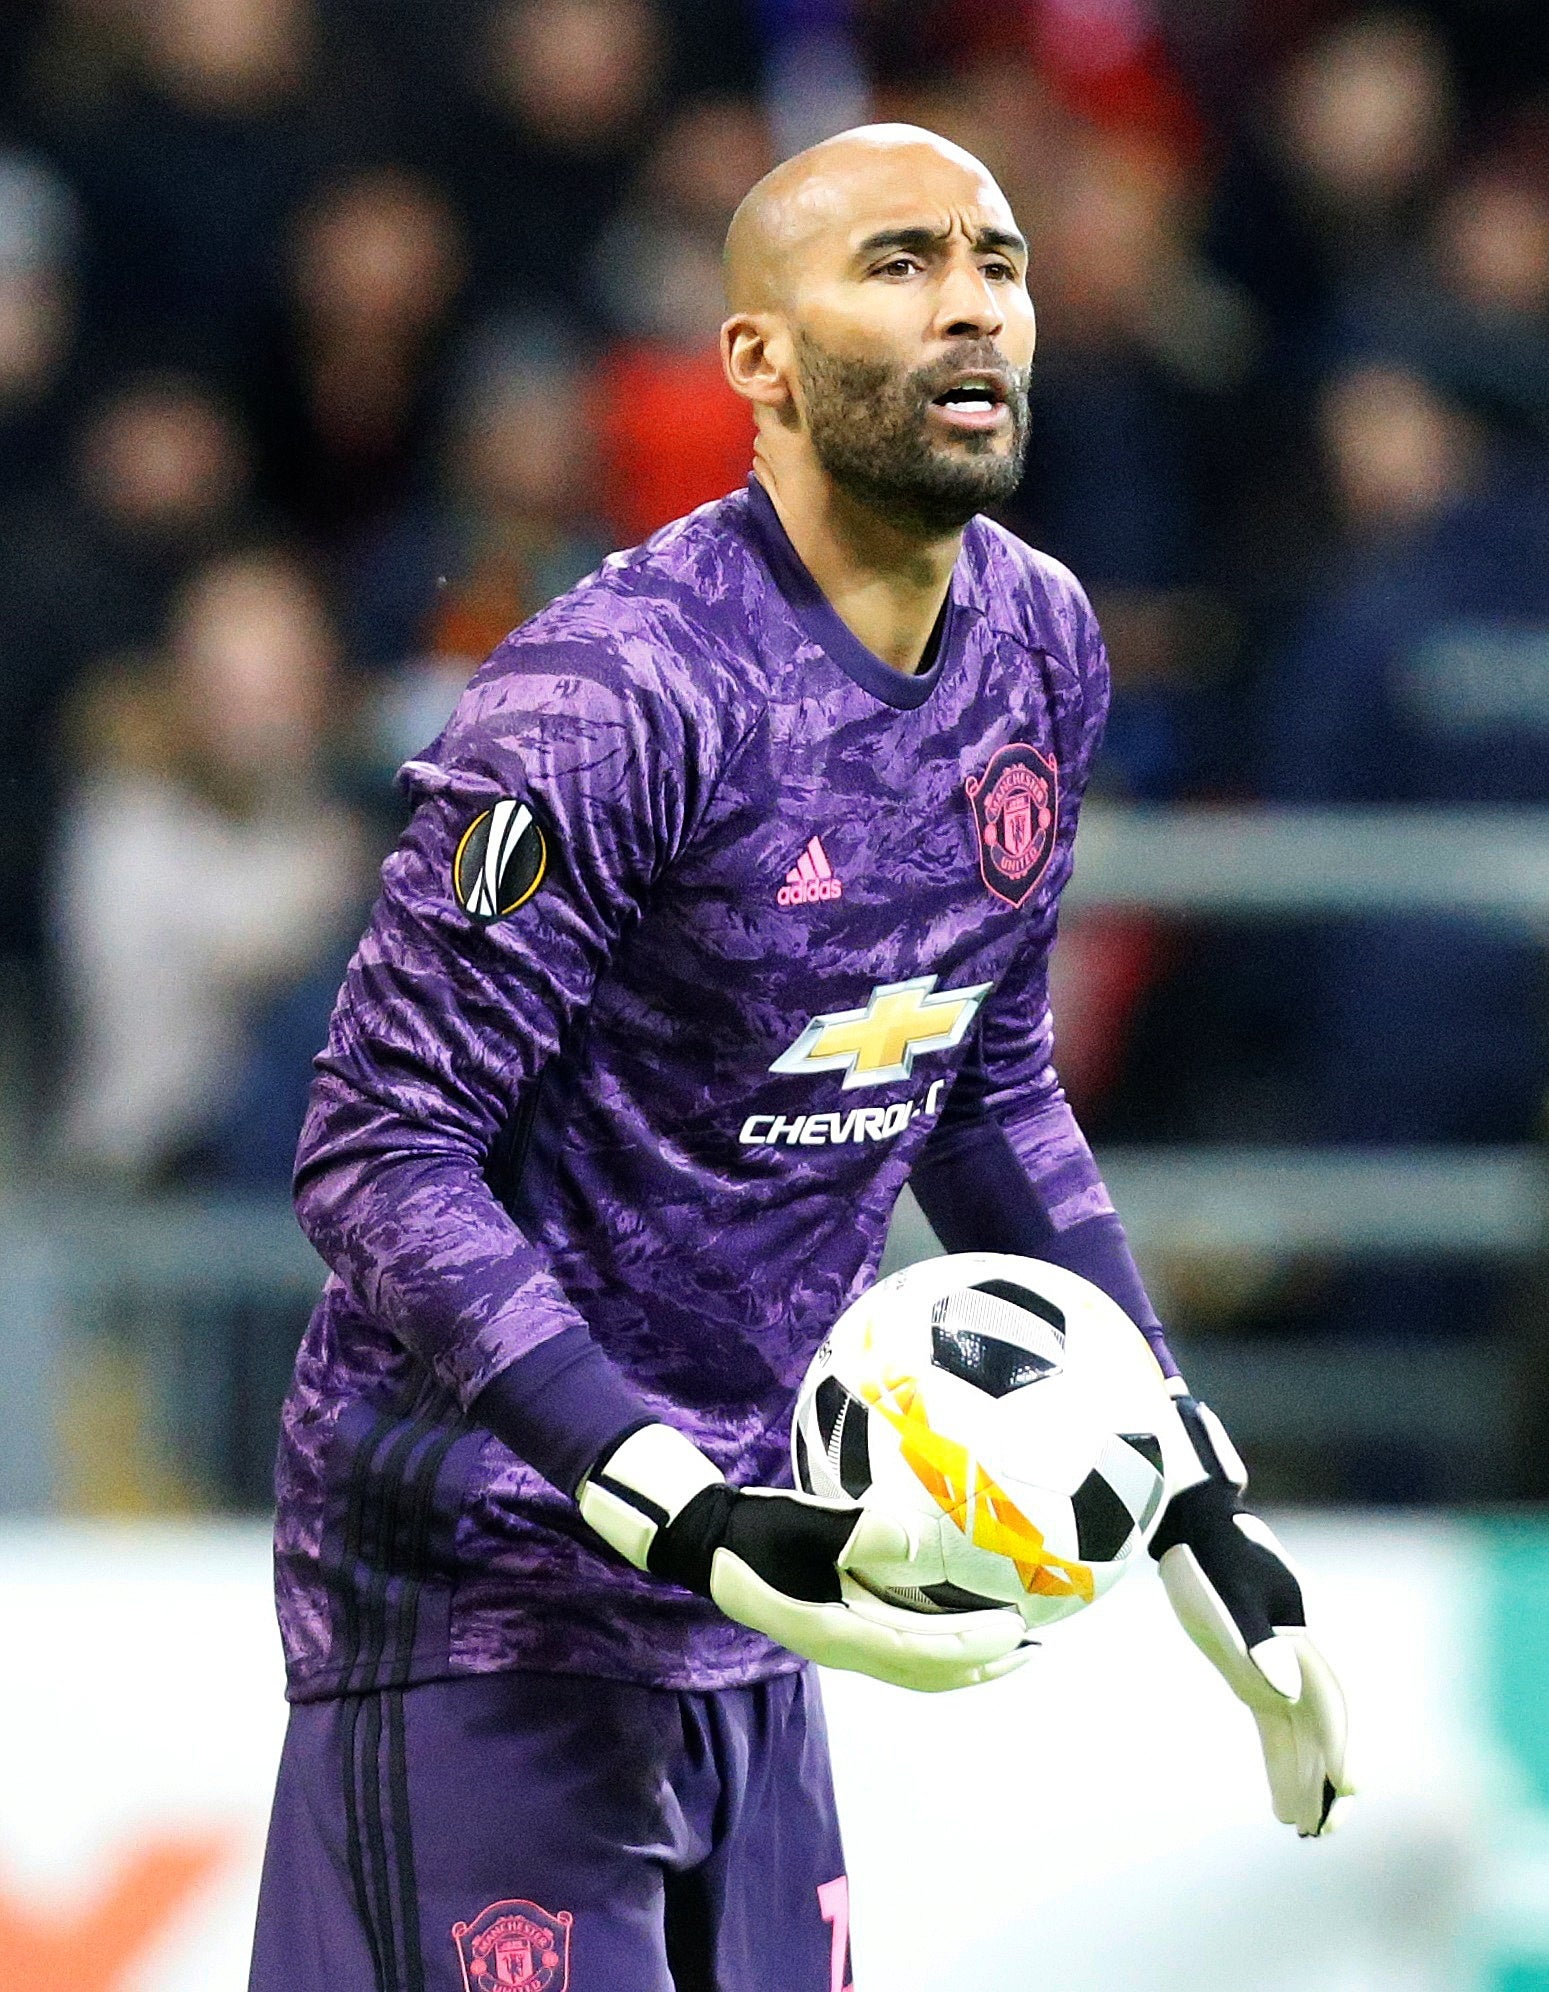 Lee Grant, 36 years old – 5/10 rating